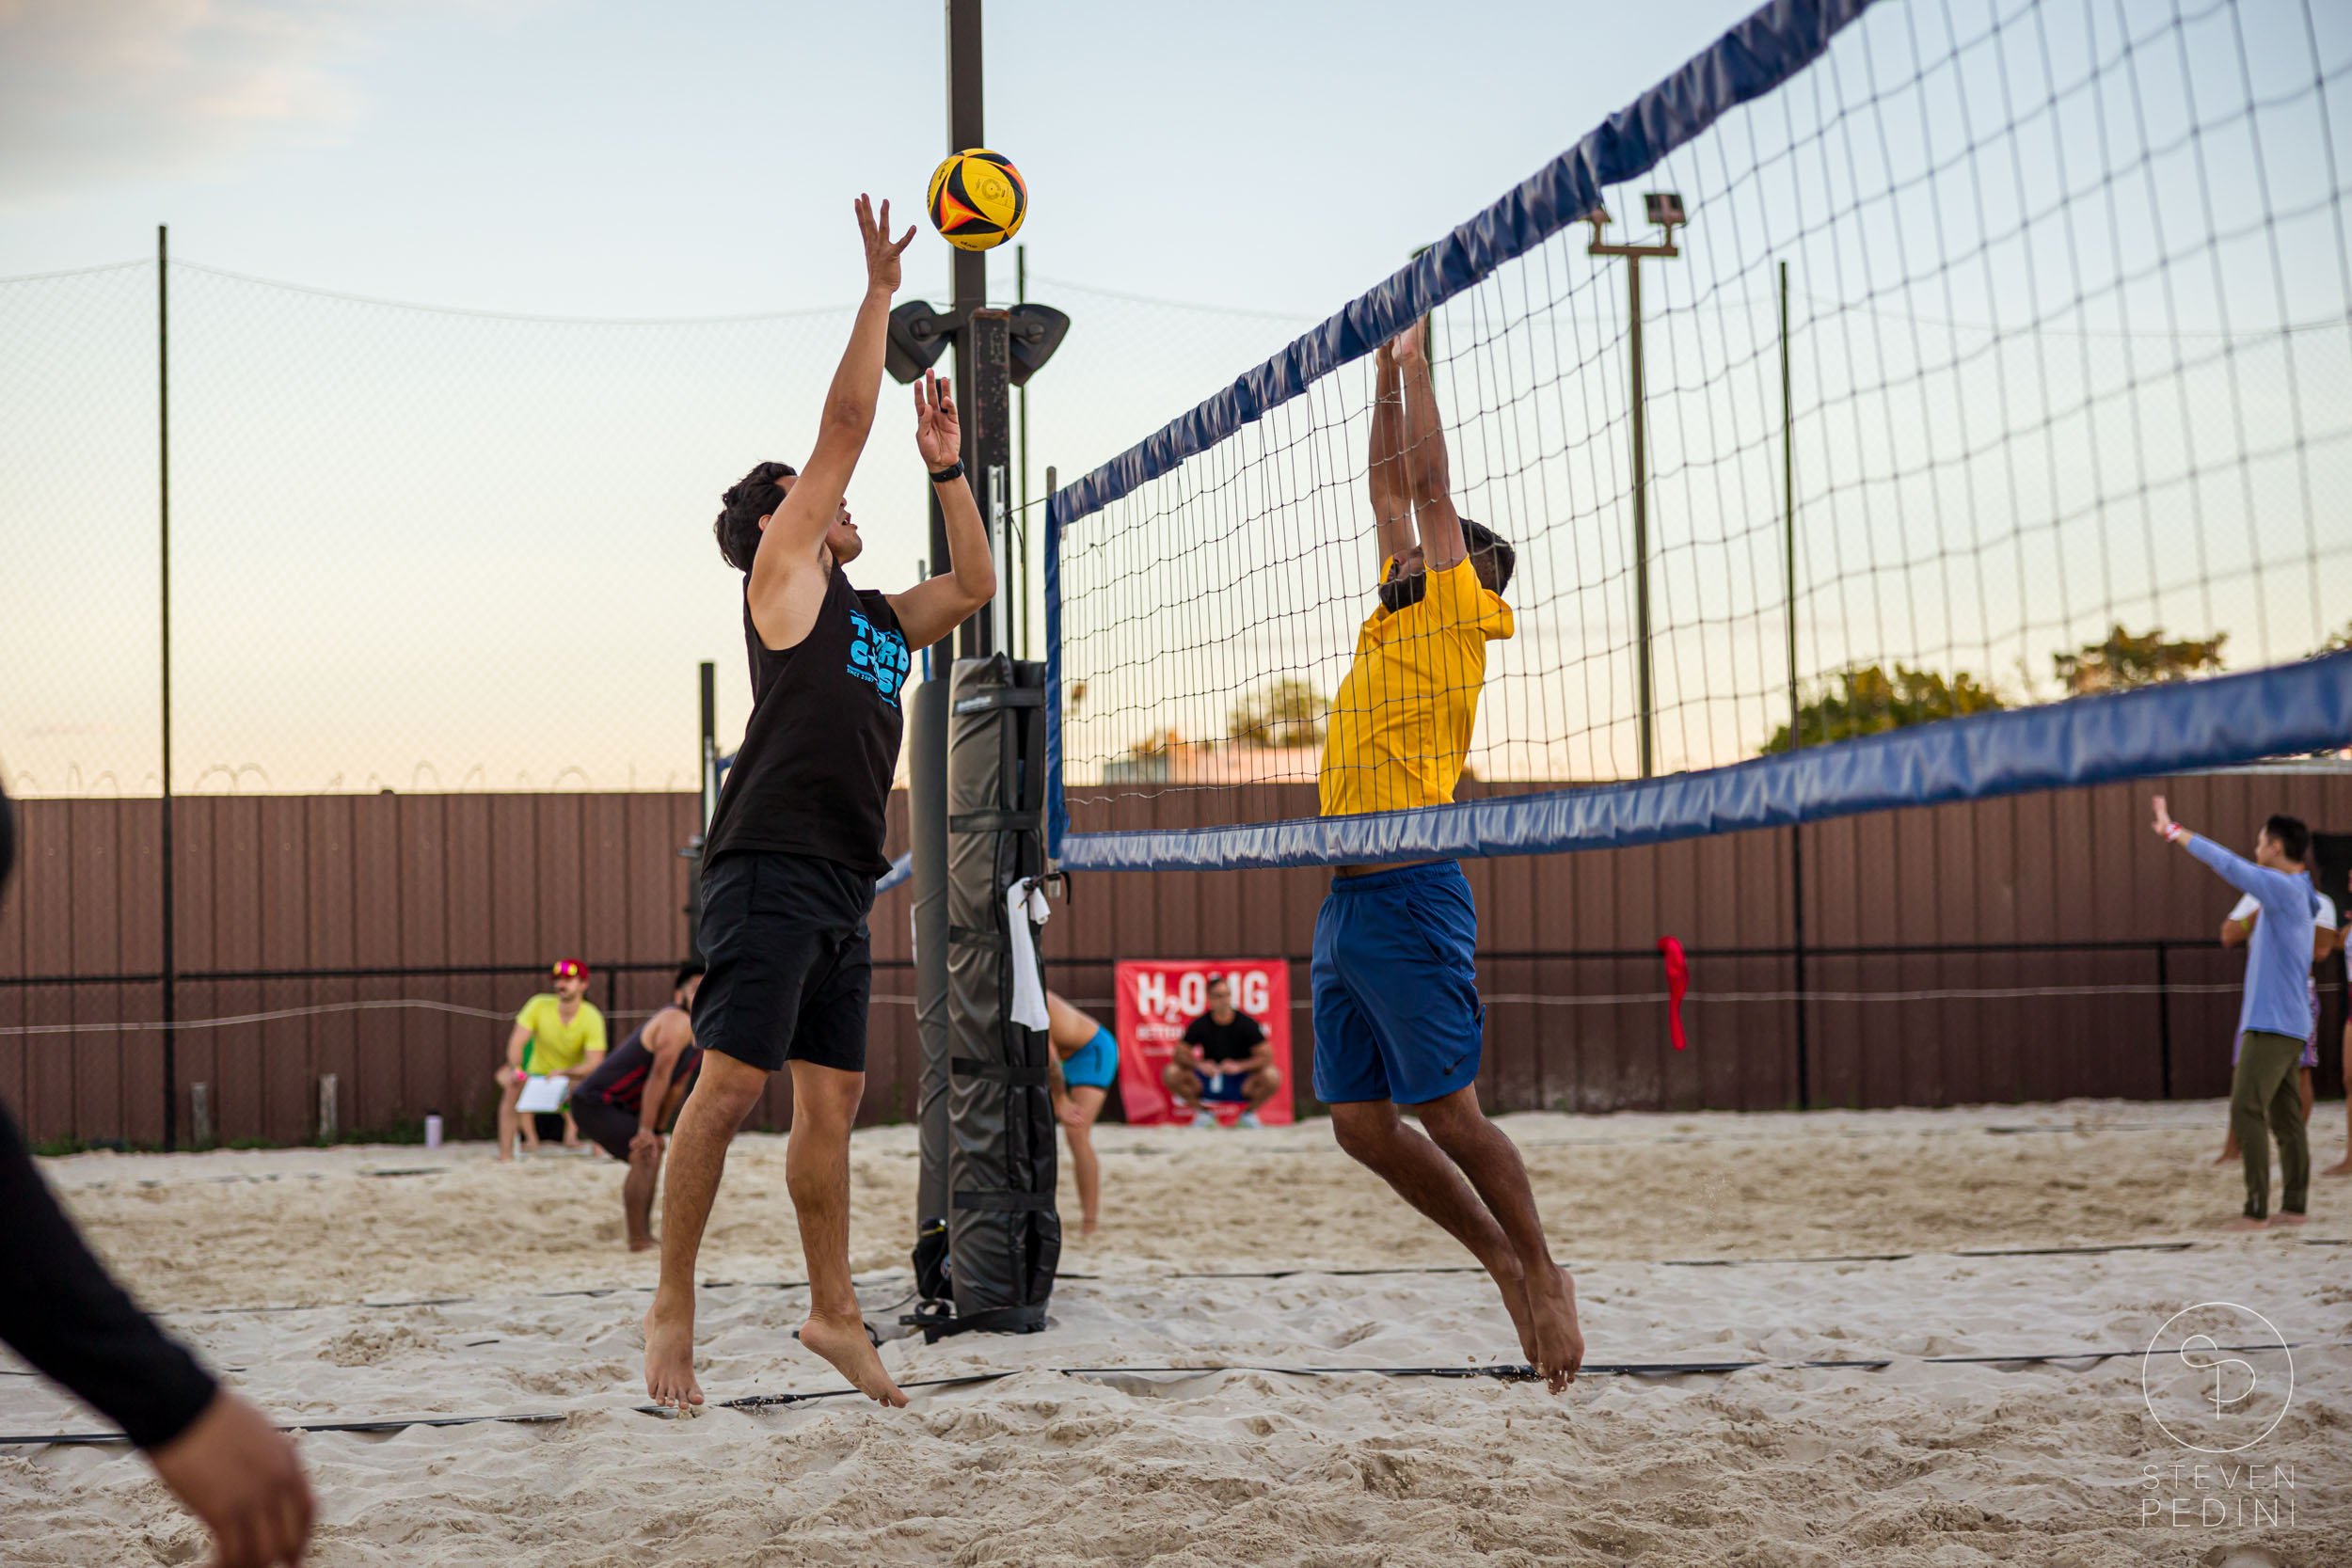 Steven Pedini Photography - Bumpy Pickle - Sand Volleyball - Houston TX - World Cup of Volleyball - 00230.jpg